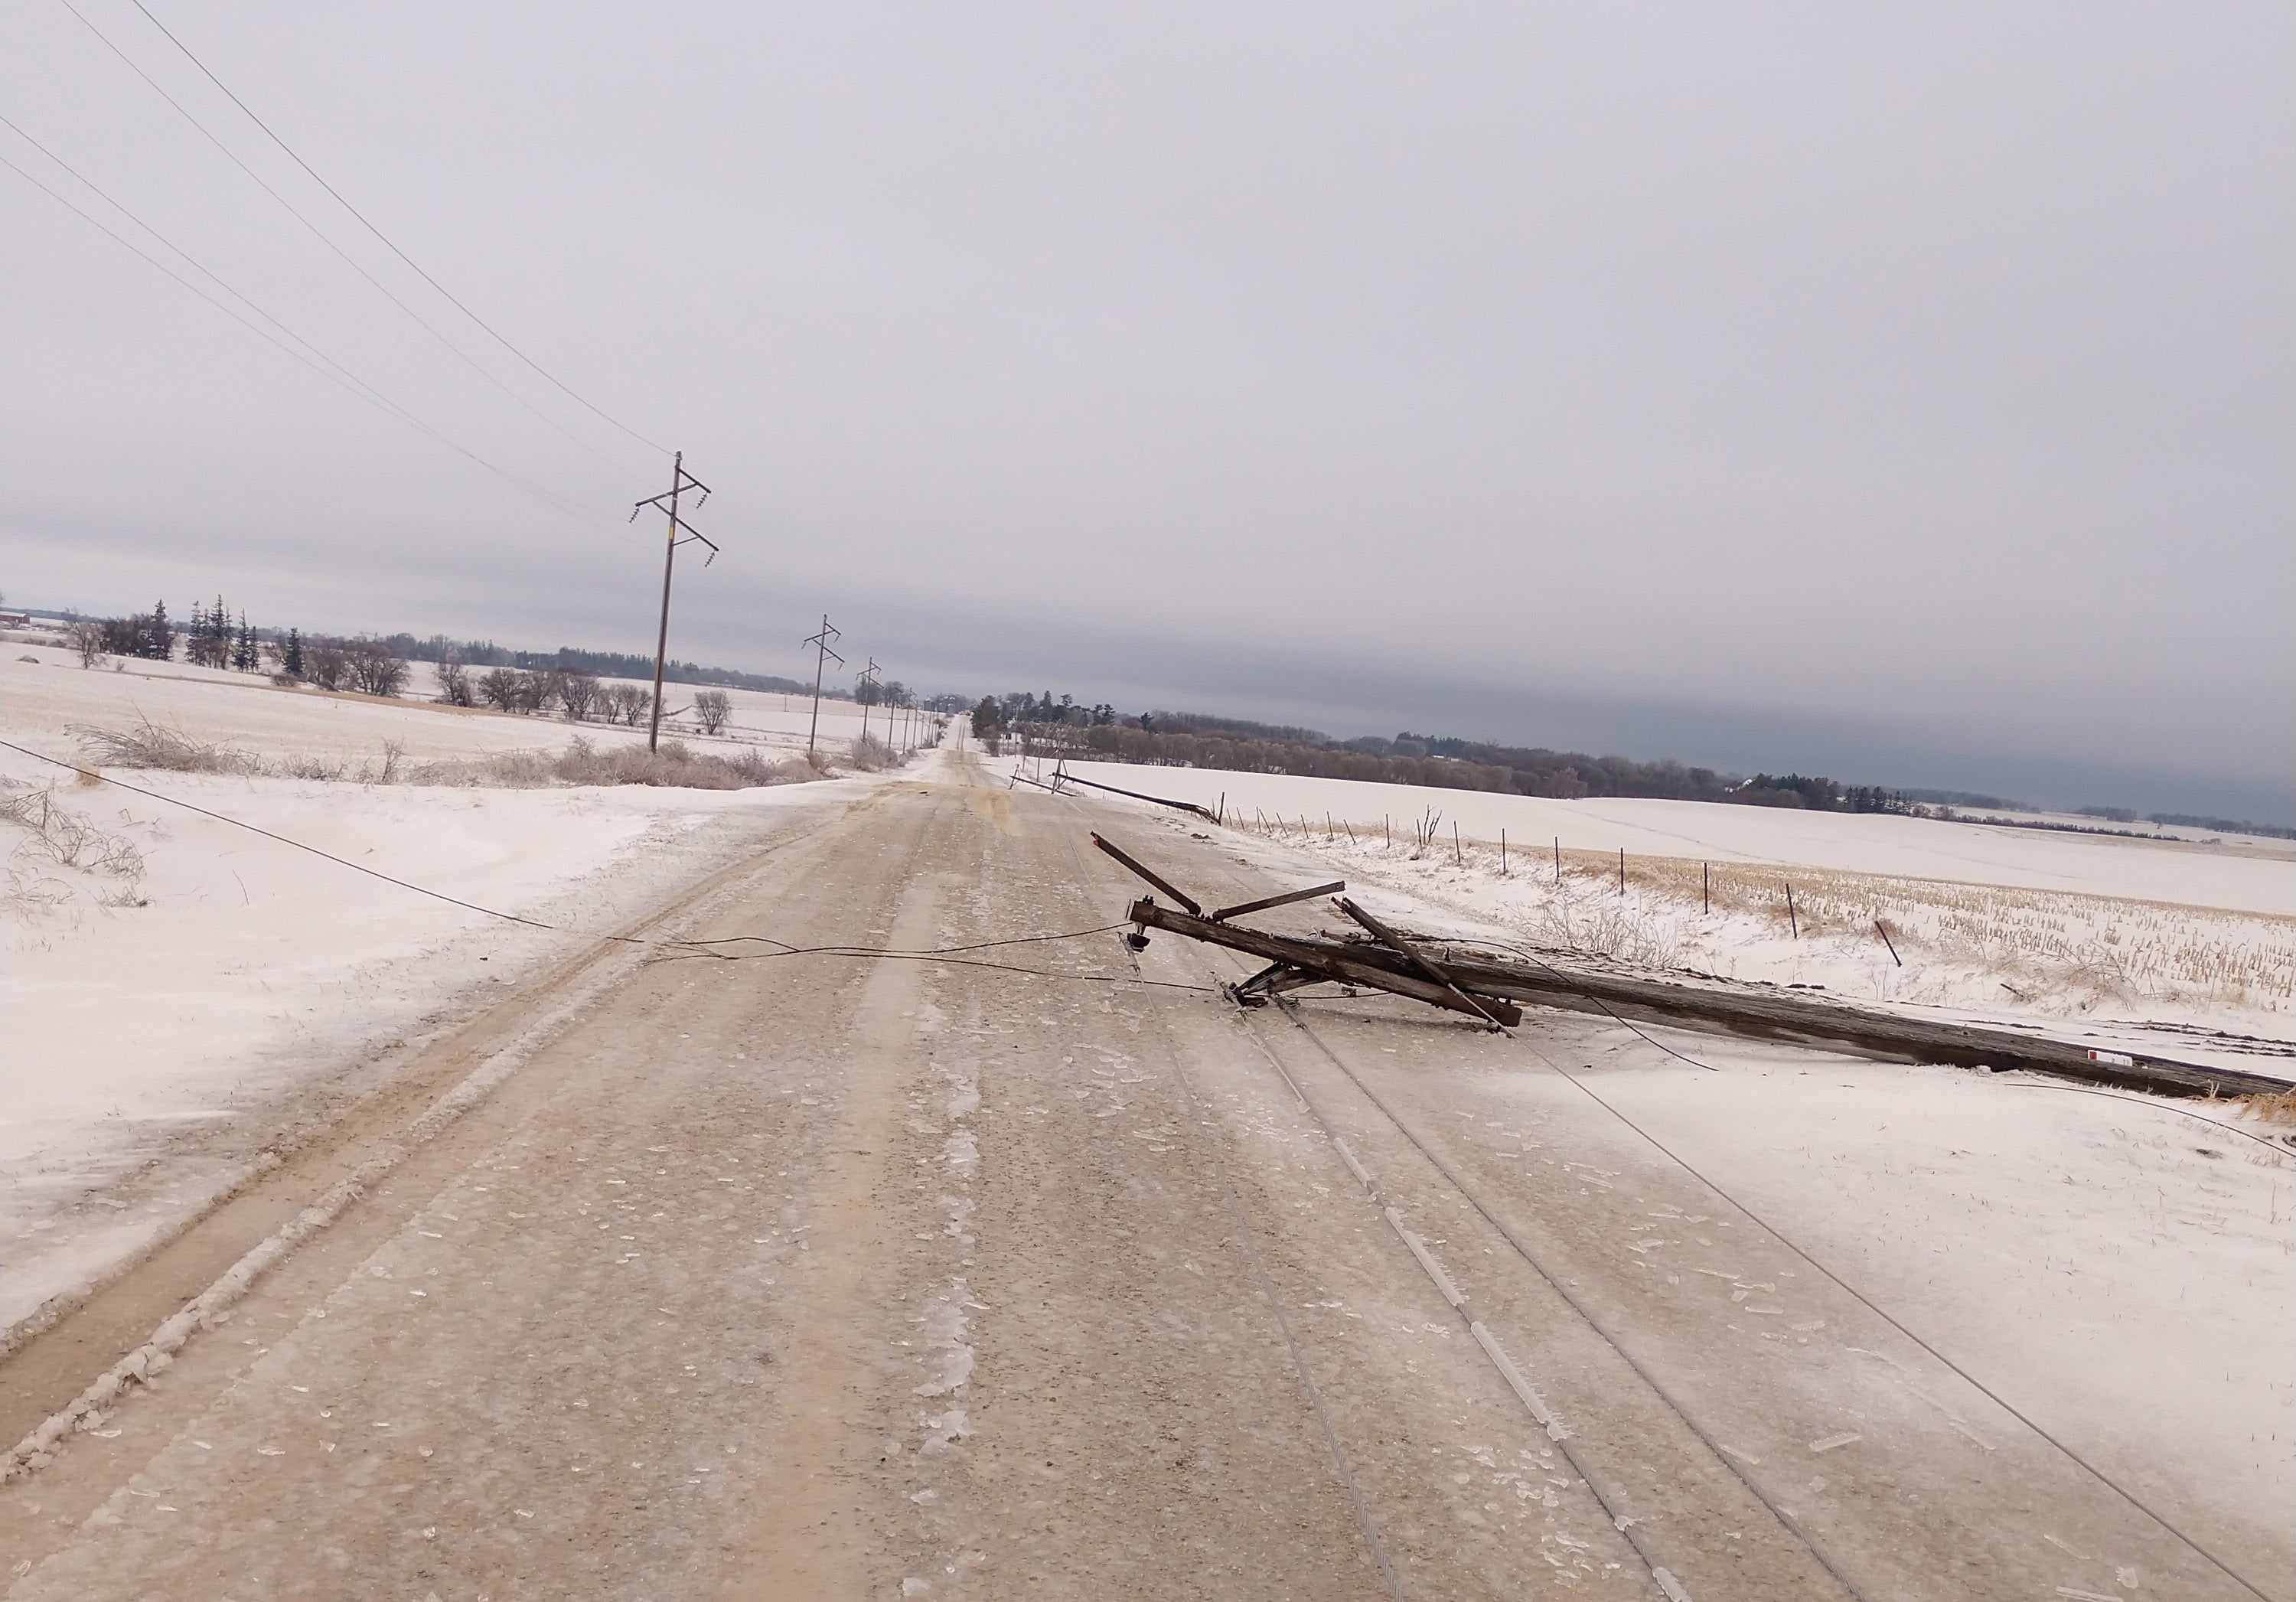 photo showing pole laying across road